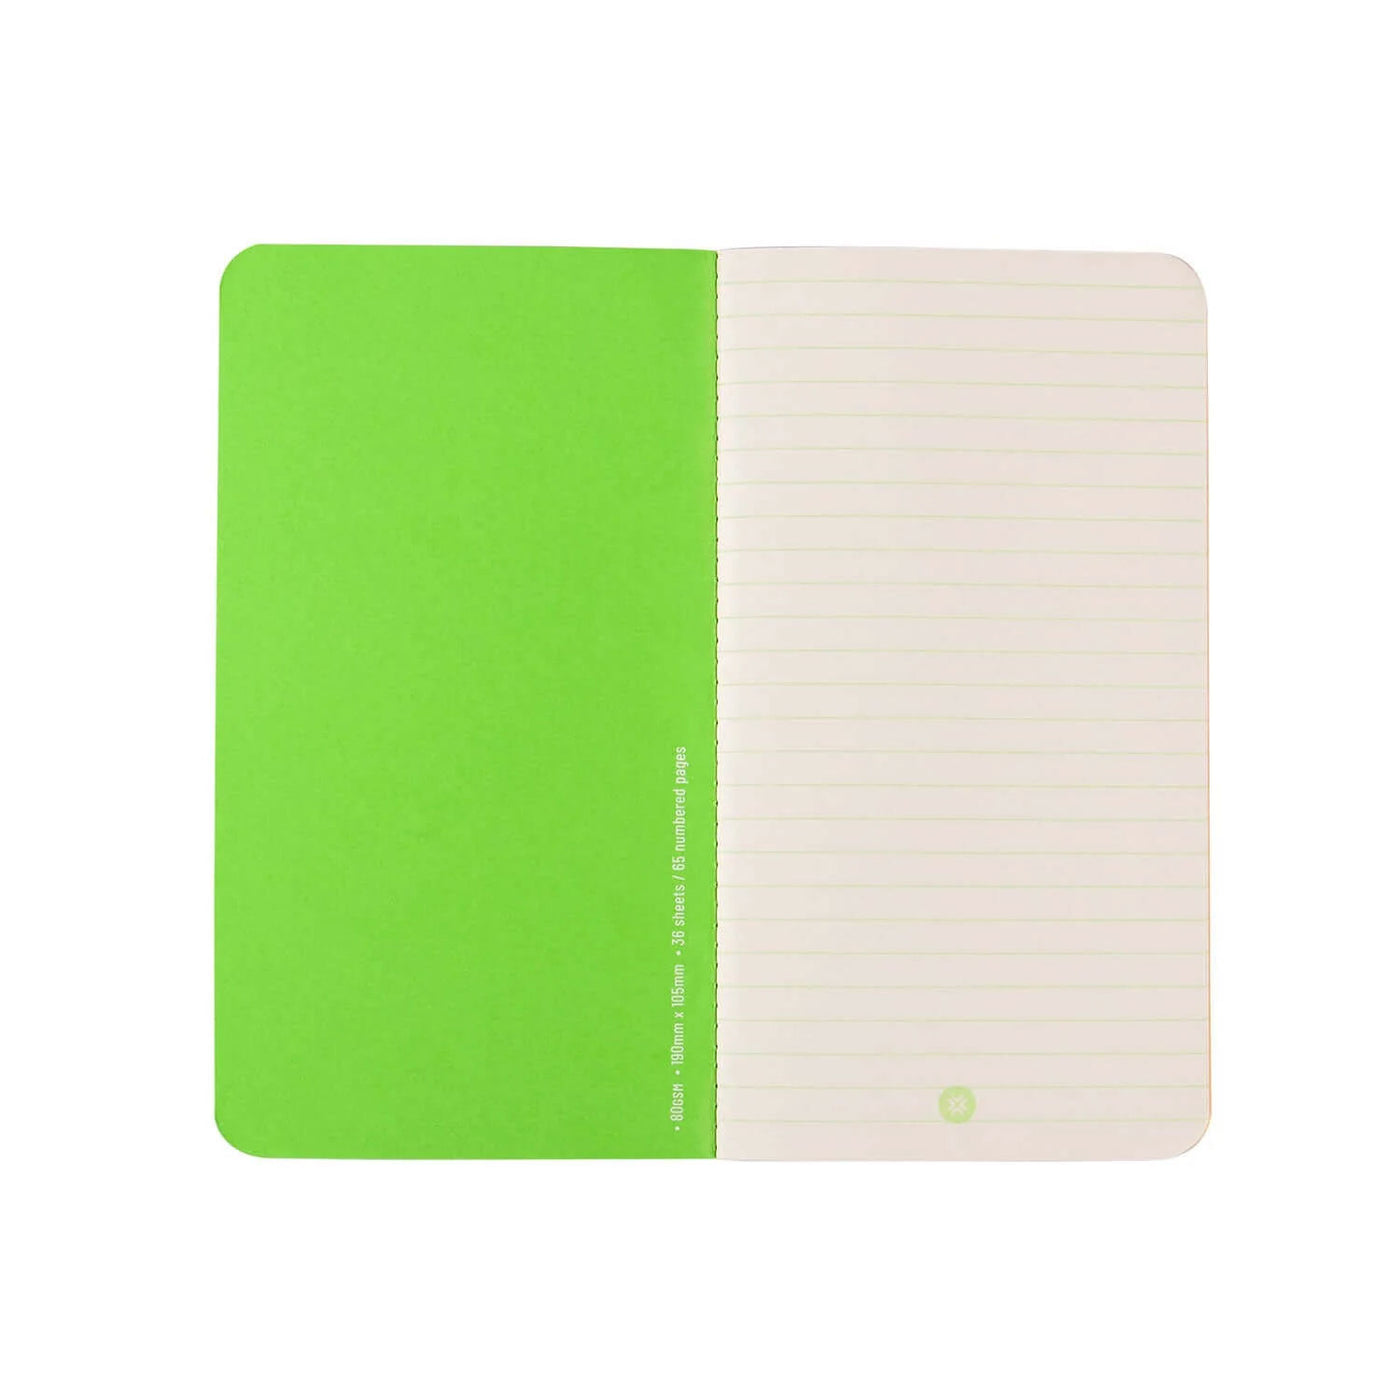 Pennline Quikfill Notebook Refill For Quikrite, Yellow Green - Set Of 2 5